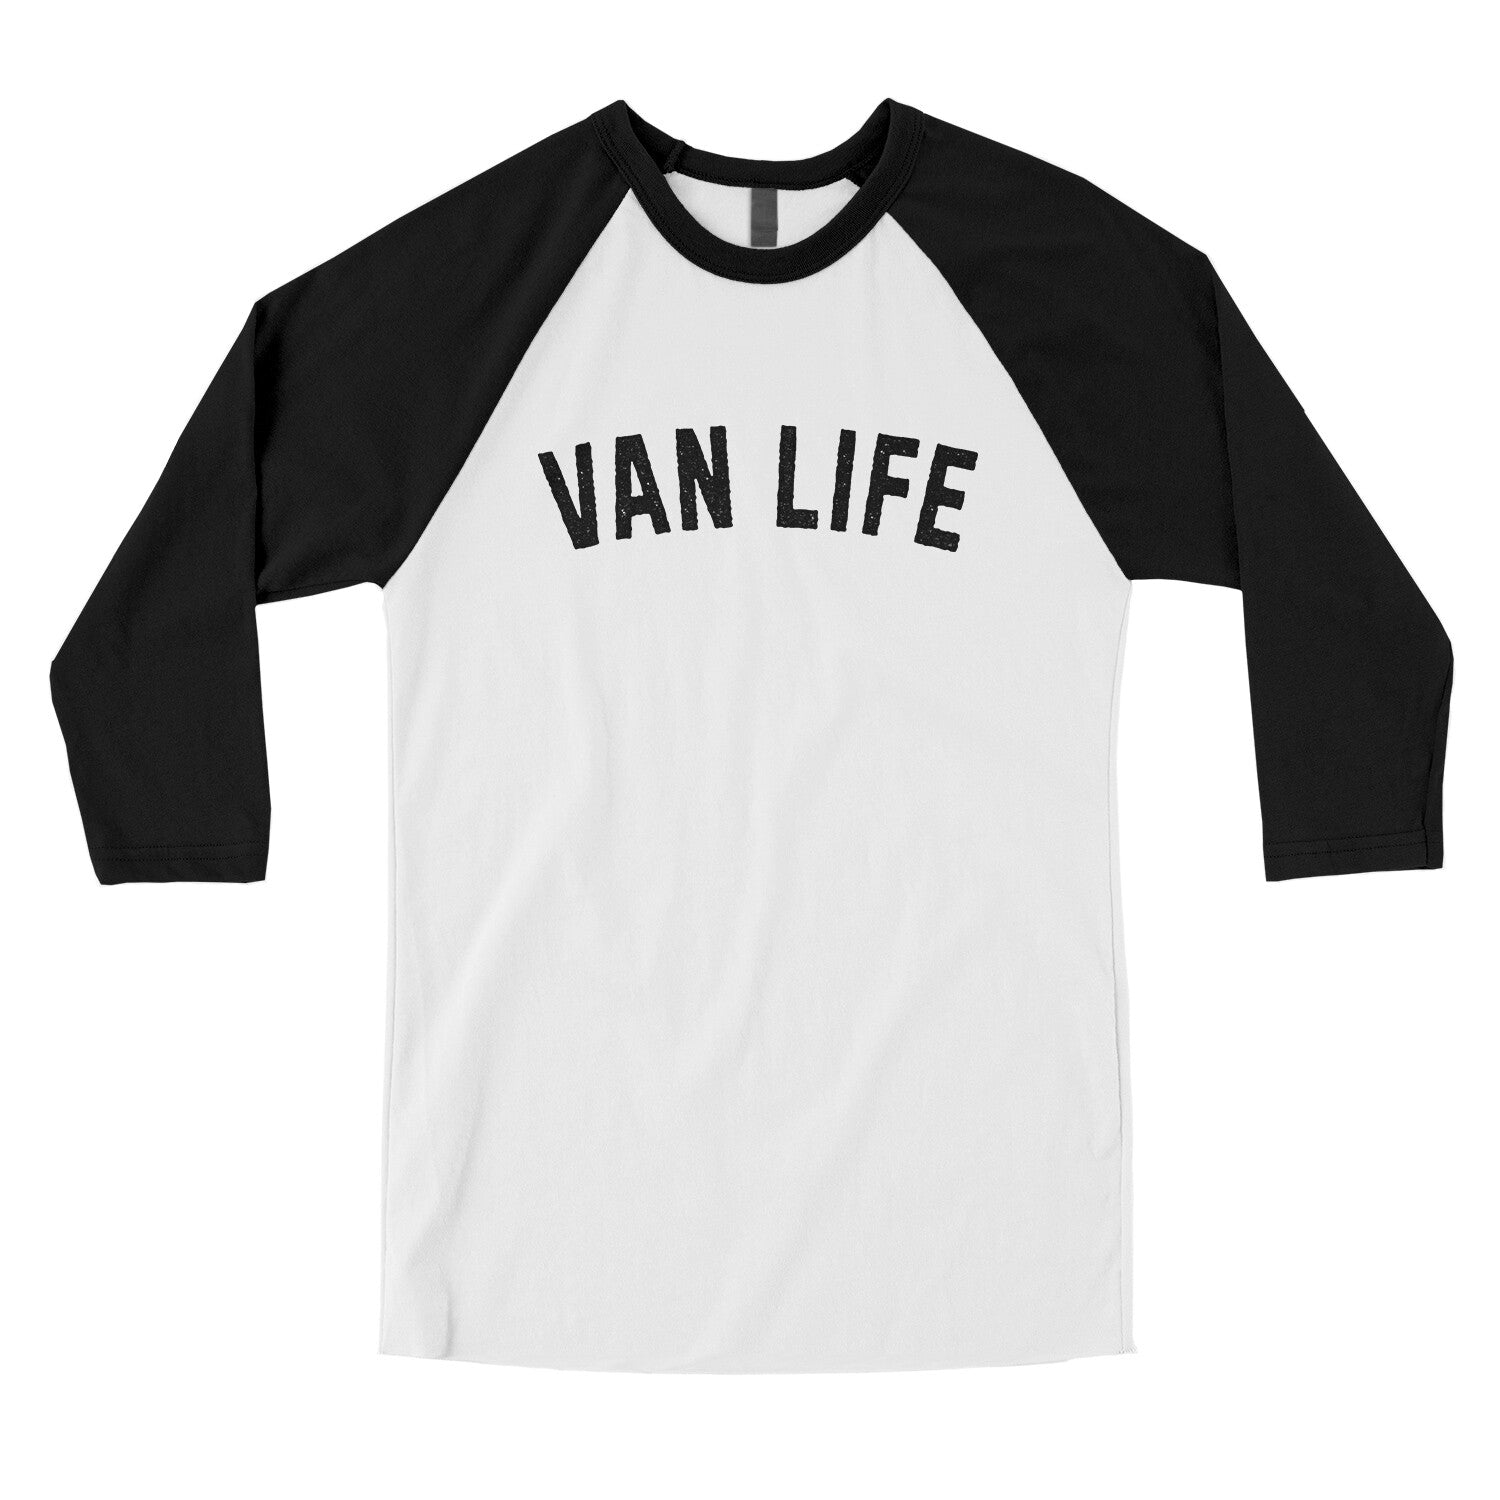 Van Life in White with Black Color